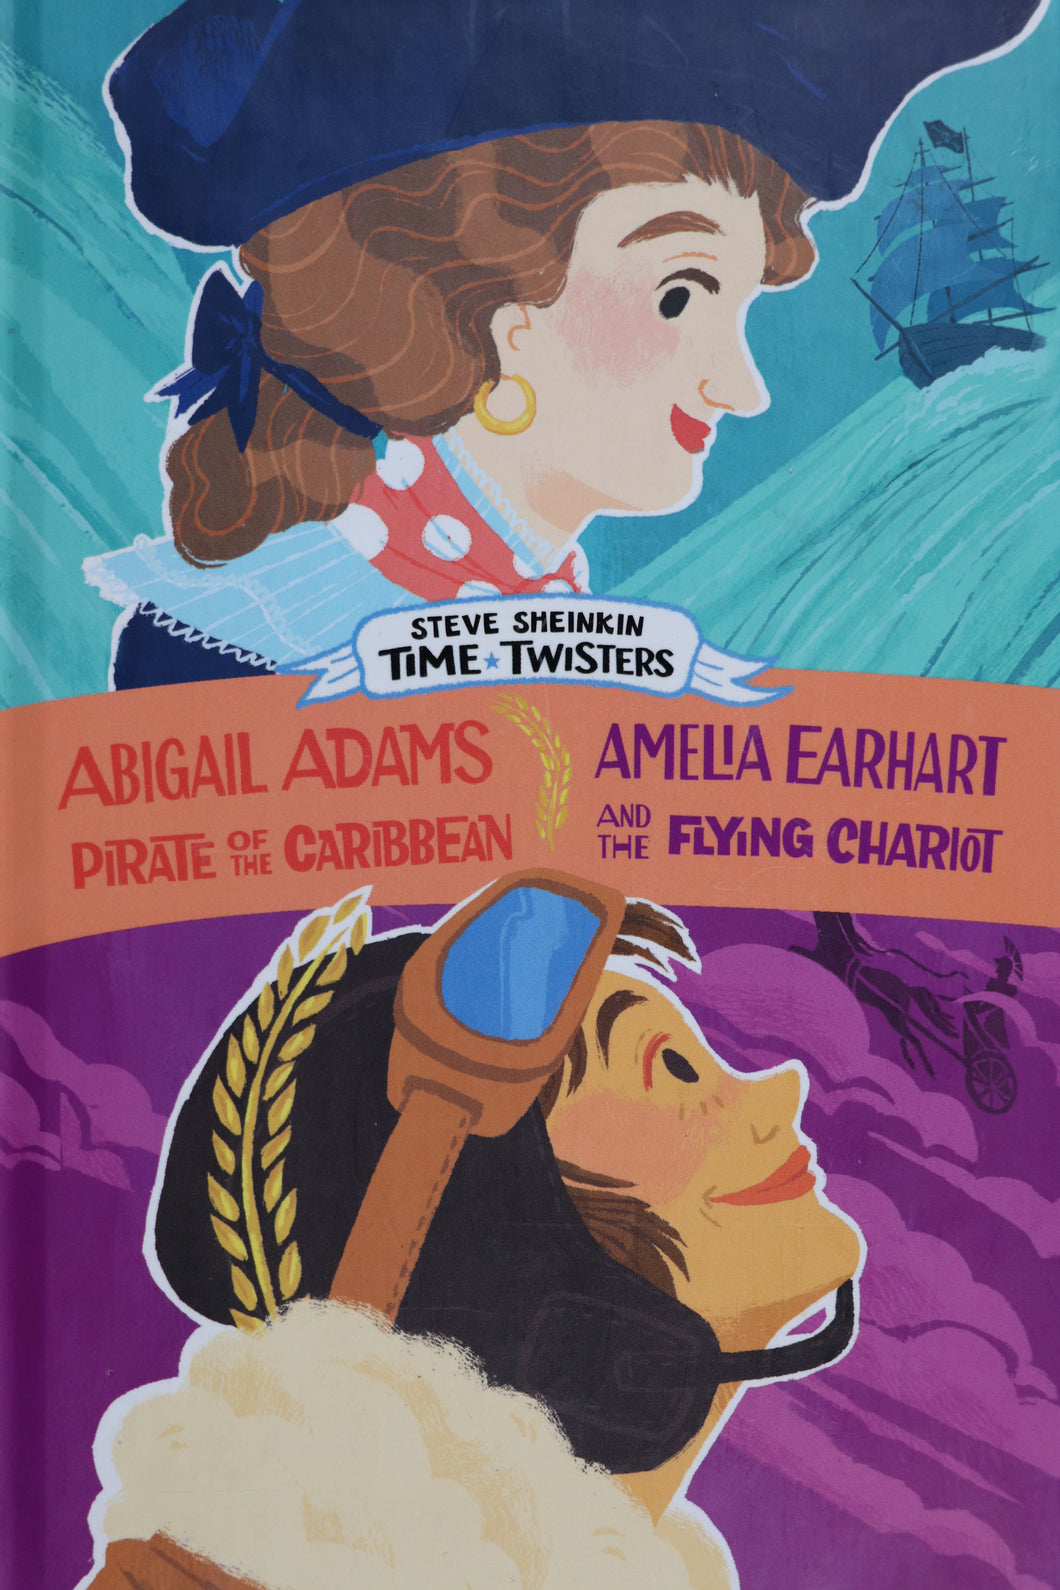 Abigail Adams Pirate of the Caribbean/Amelia Earhart and the Flying Chariot (Time Twisters)